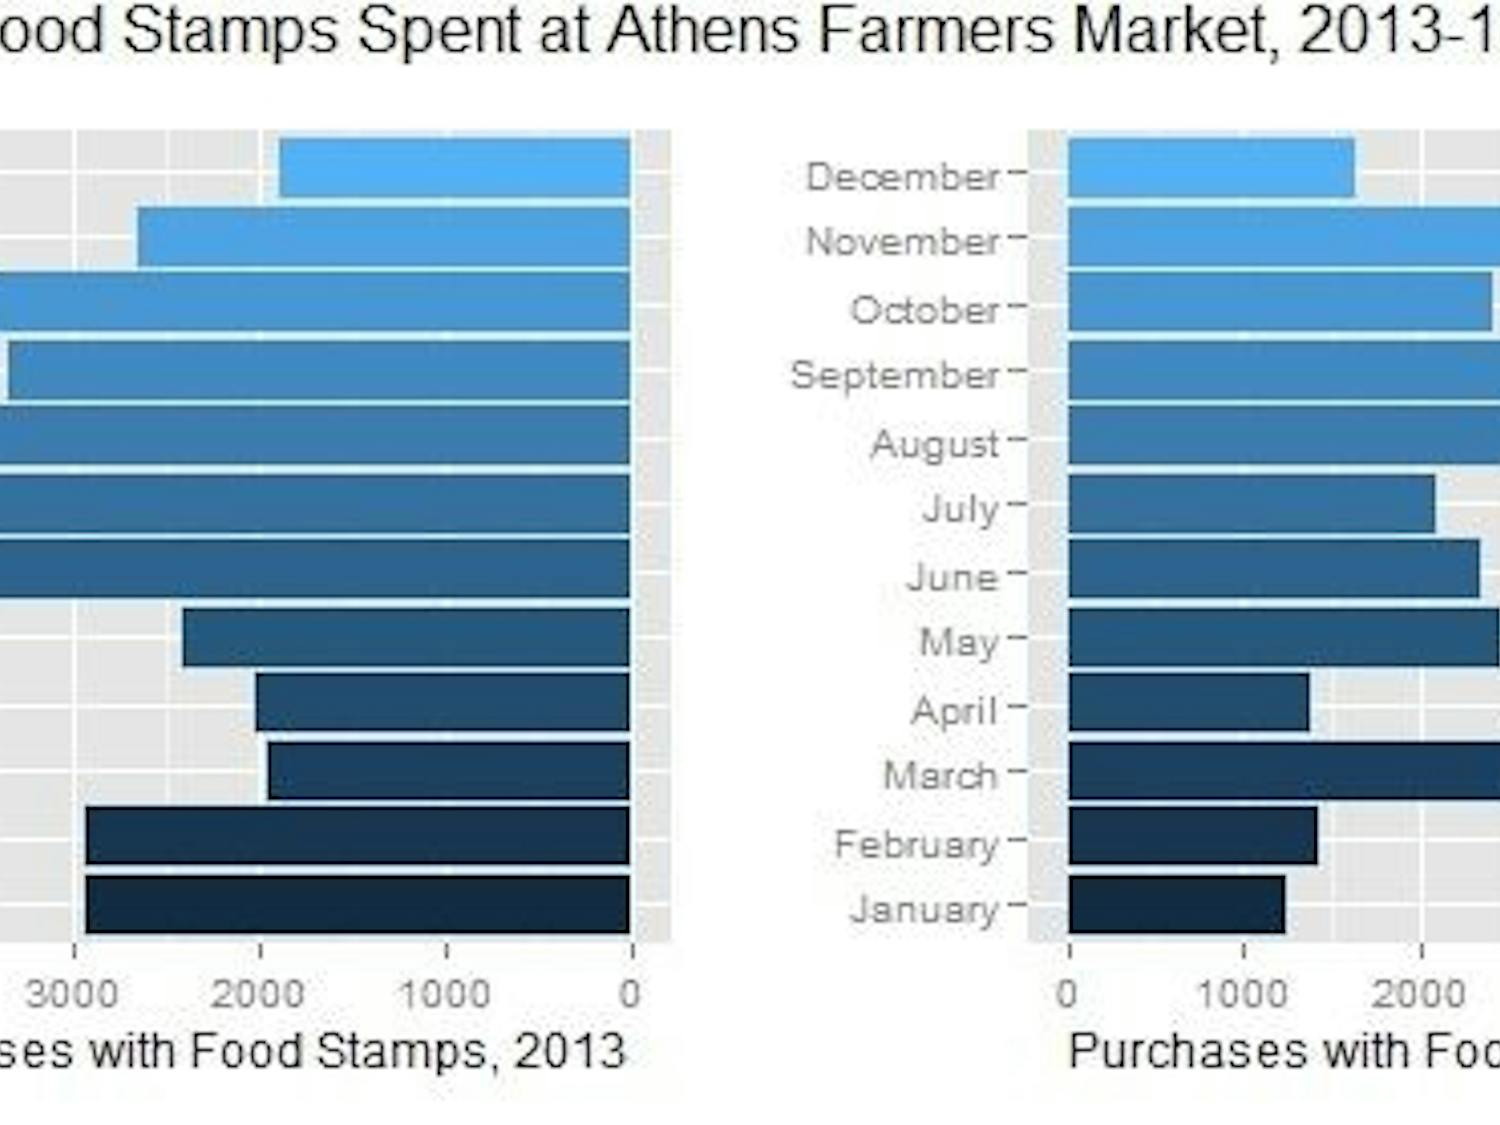 Food stamps spent at Athens Farmers Market 2013-14  